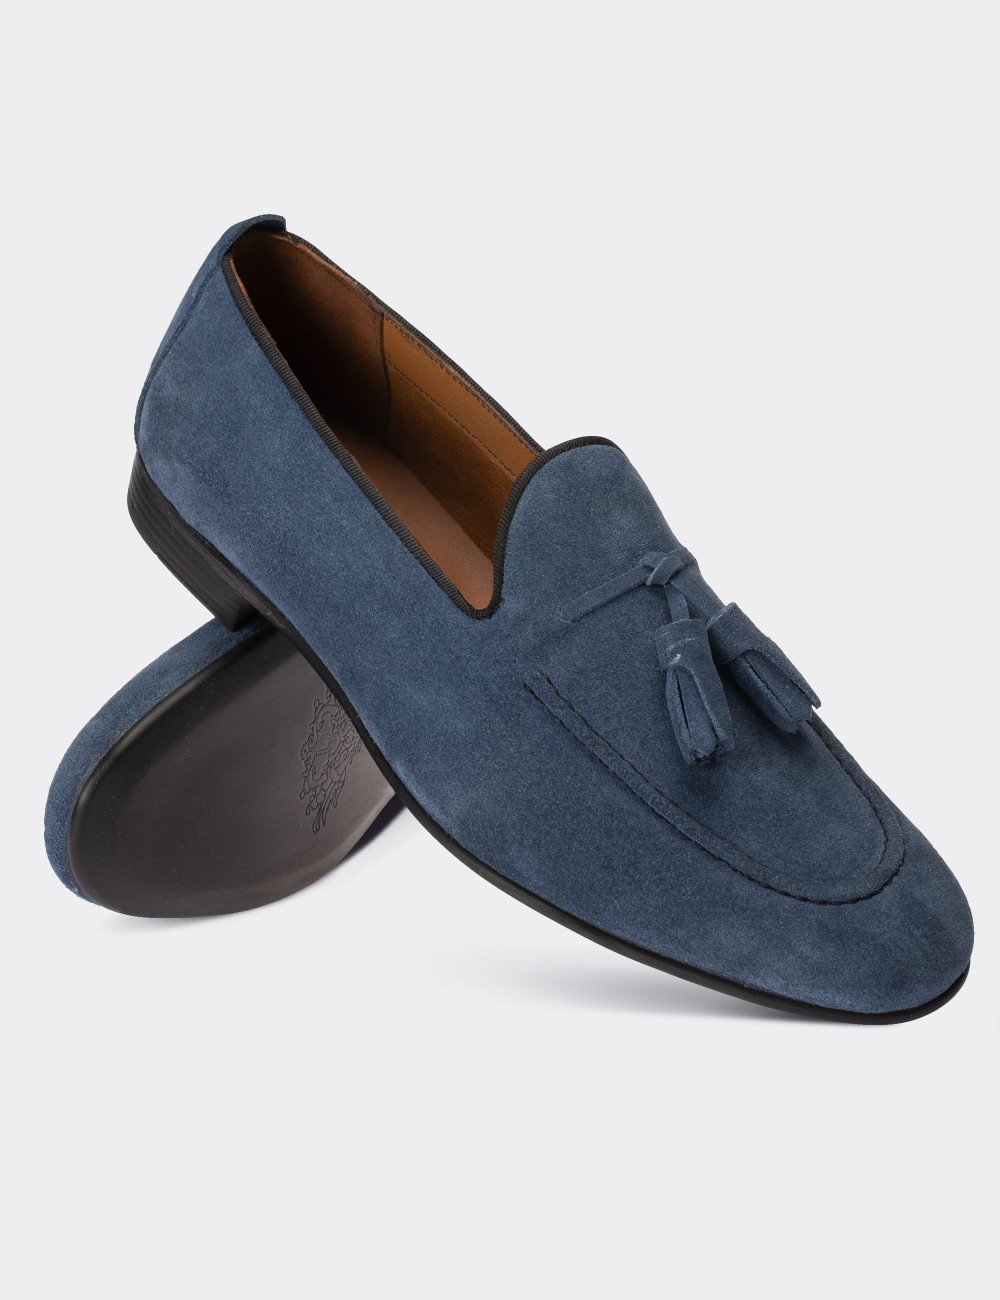 Blue Suede Leather Loafers - 01701MMVIC01